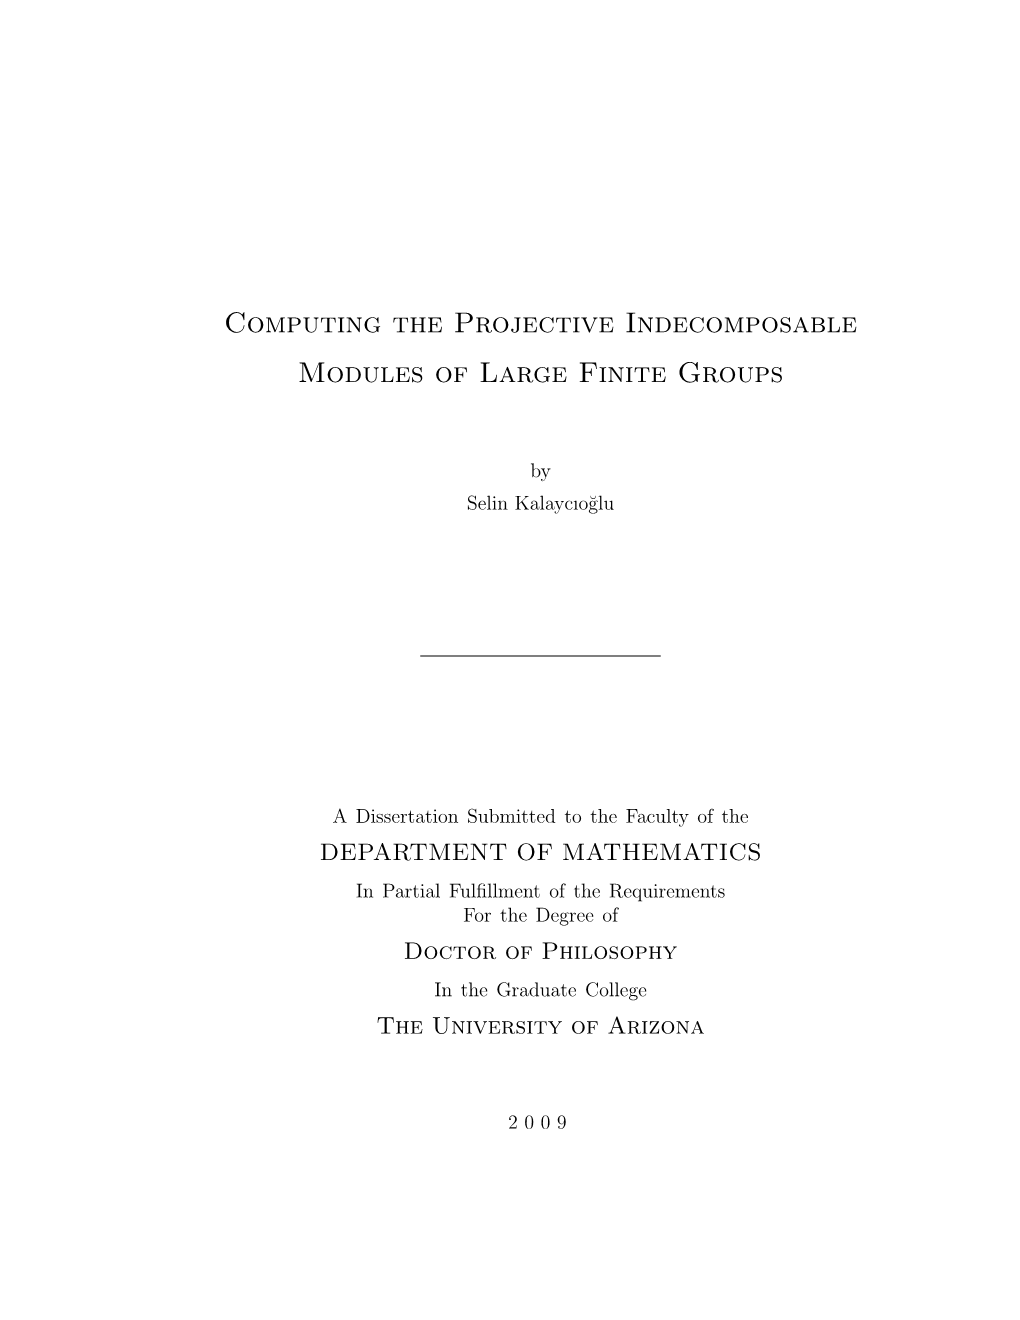 Computing the Projective Indecomposable Modules of Large Finite Groups